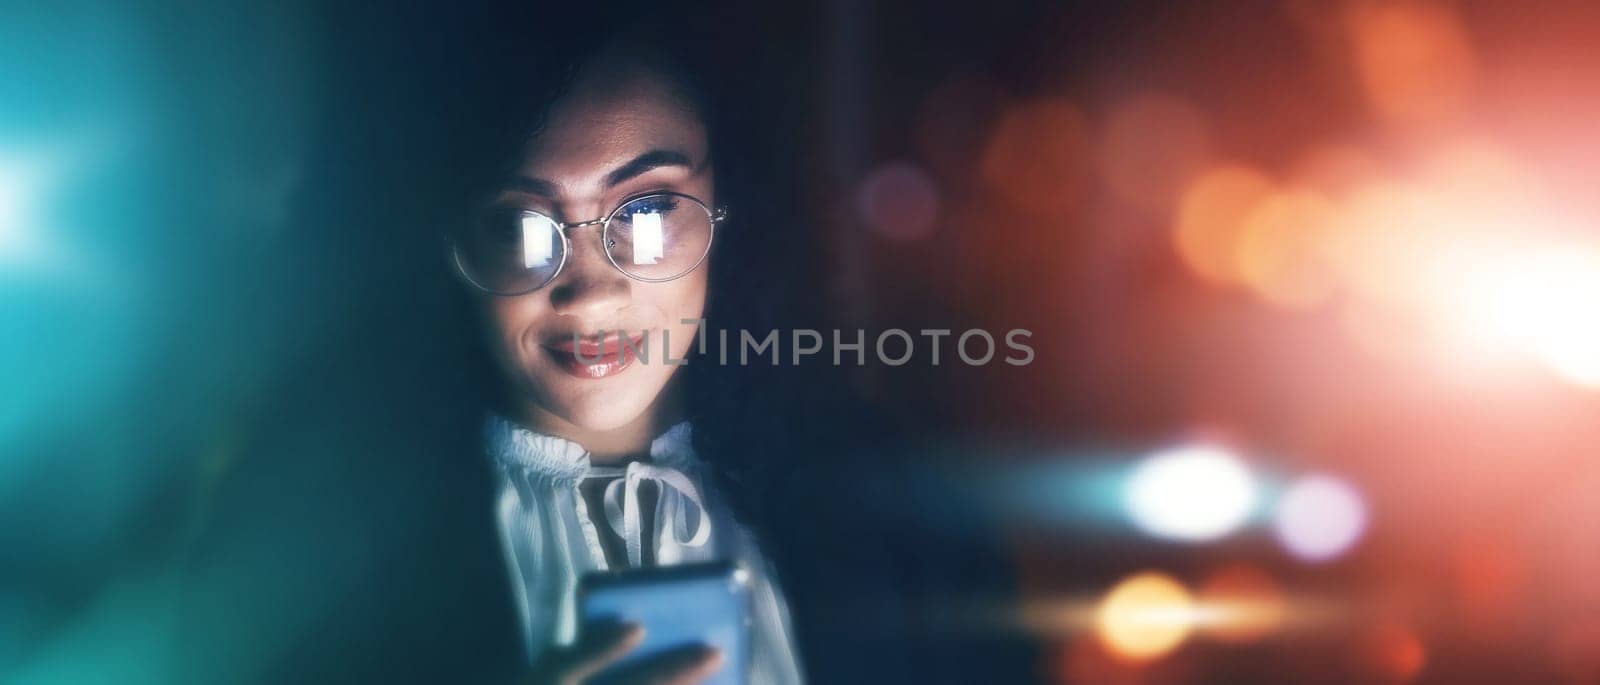 Businesswoman, phone and communication at night for texting, chatting or networking on dark background. Female employee smile holding smartphone working late for online planning strategy on mockup.